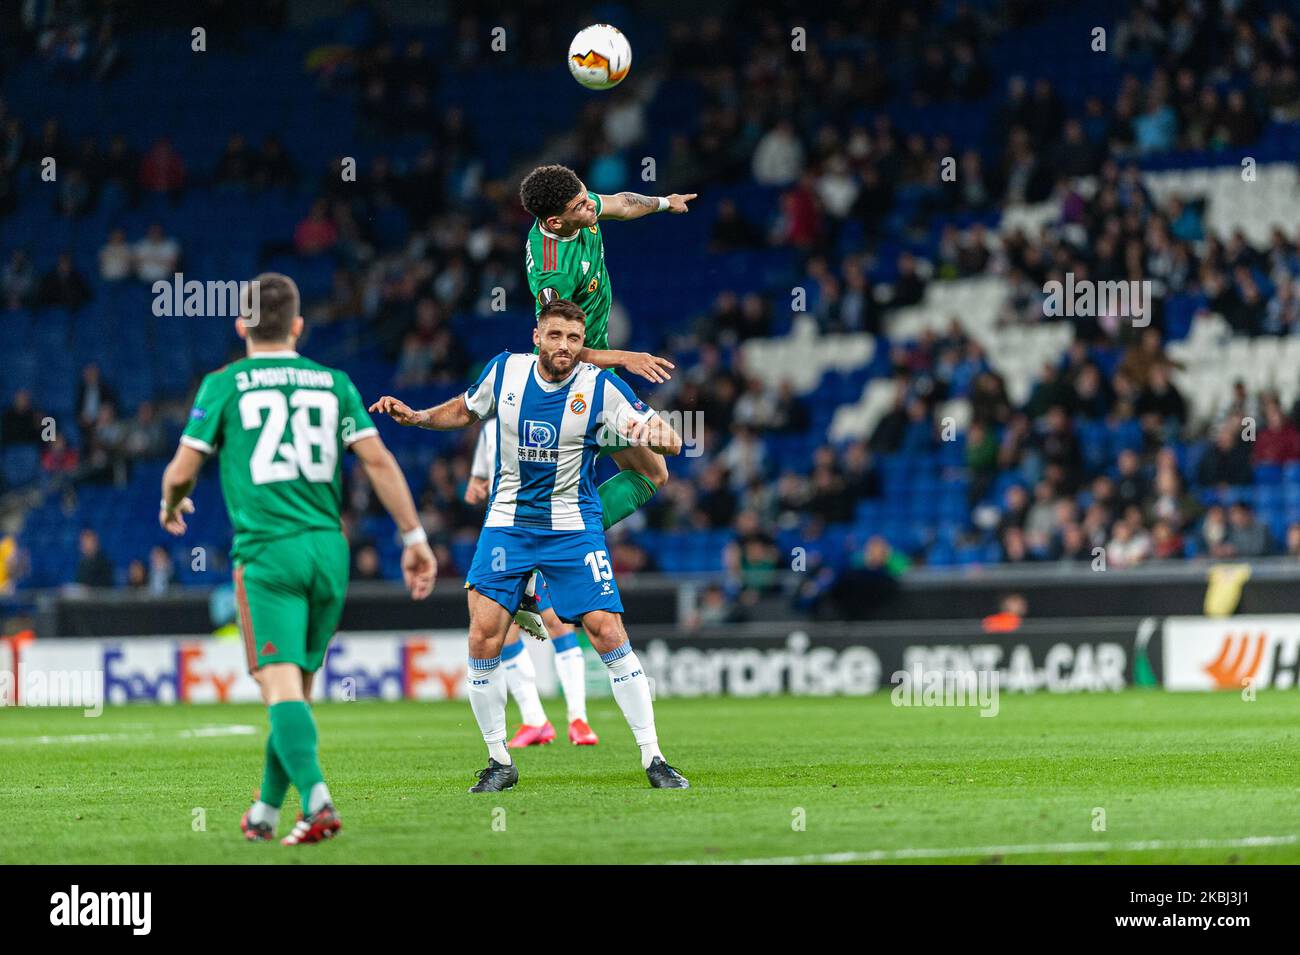 David Lopez during the match between RCD Espanyol and Wolverhampton Wanderers FC, corresponding to the second leg of the round of 32 of the Europa League, played at the RCDE Stadium, on 27th February 2020, in Barcelona, Spain. (Photo by Xavier Ballart/Urbanandsport/NurPhoto) Stock Photo